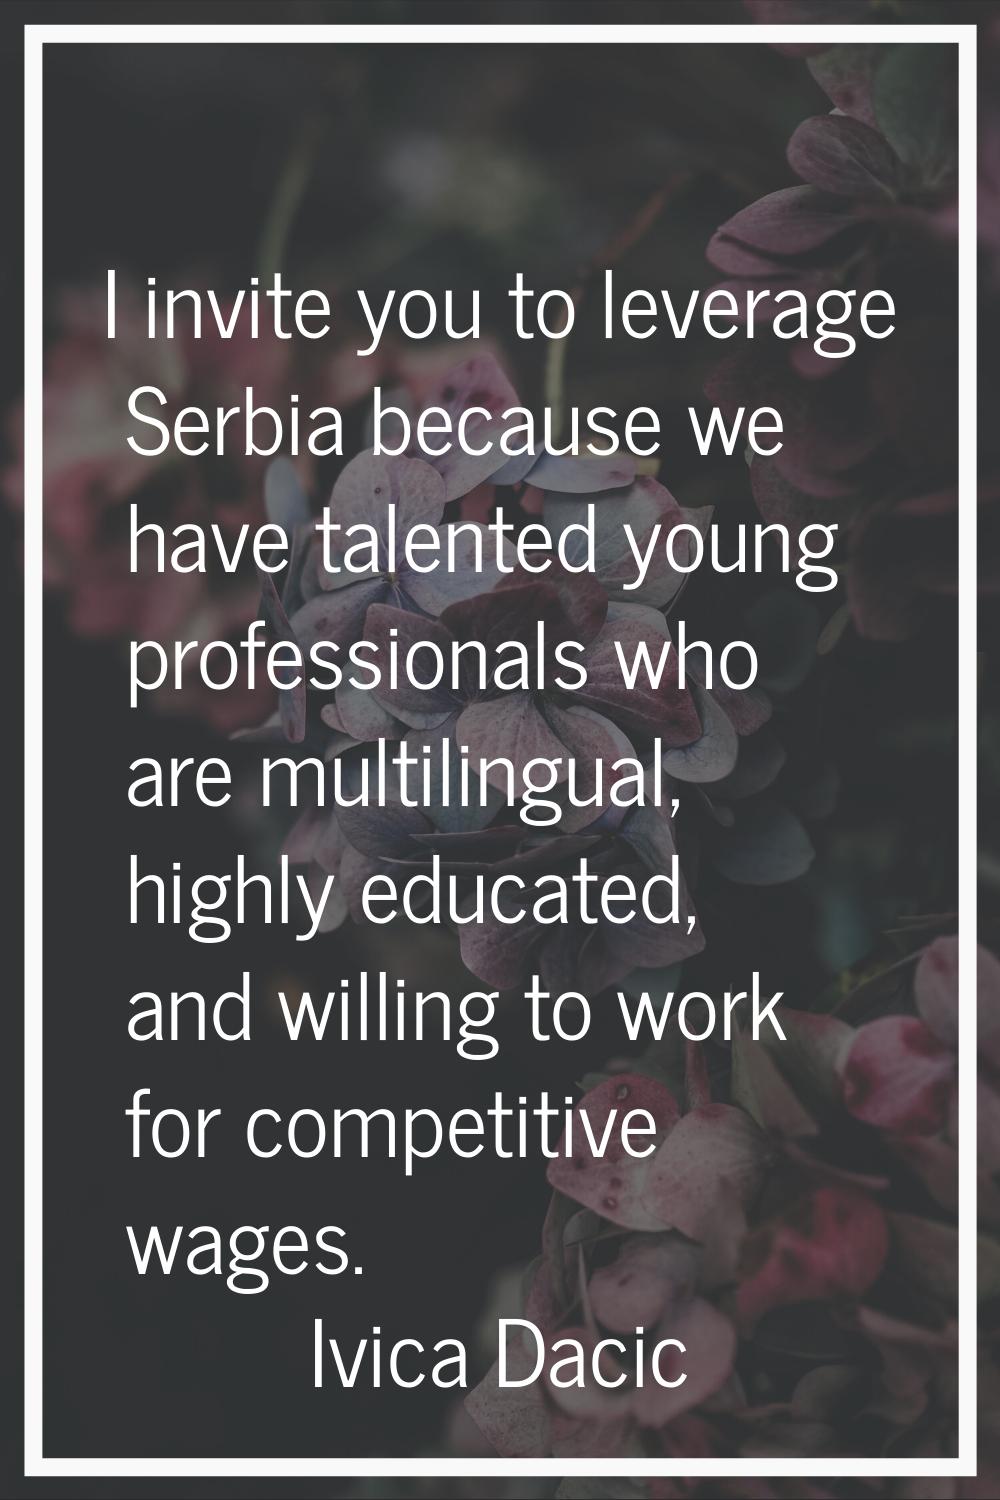 I invite you to leverage Serbia because we have talented young professionals who are multilingual, 